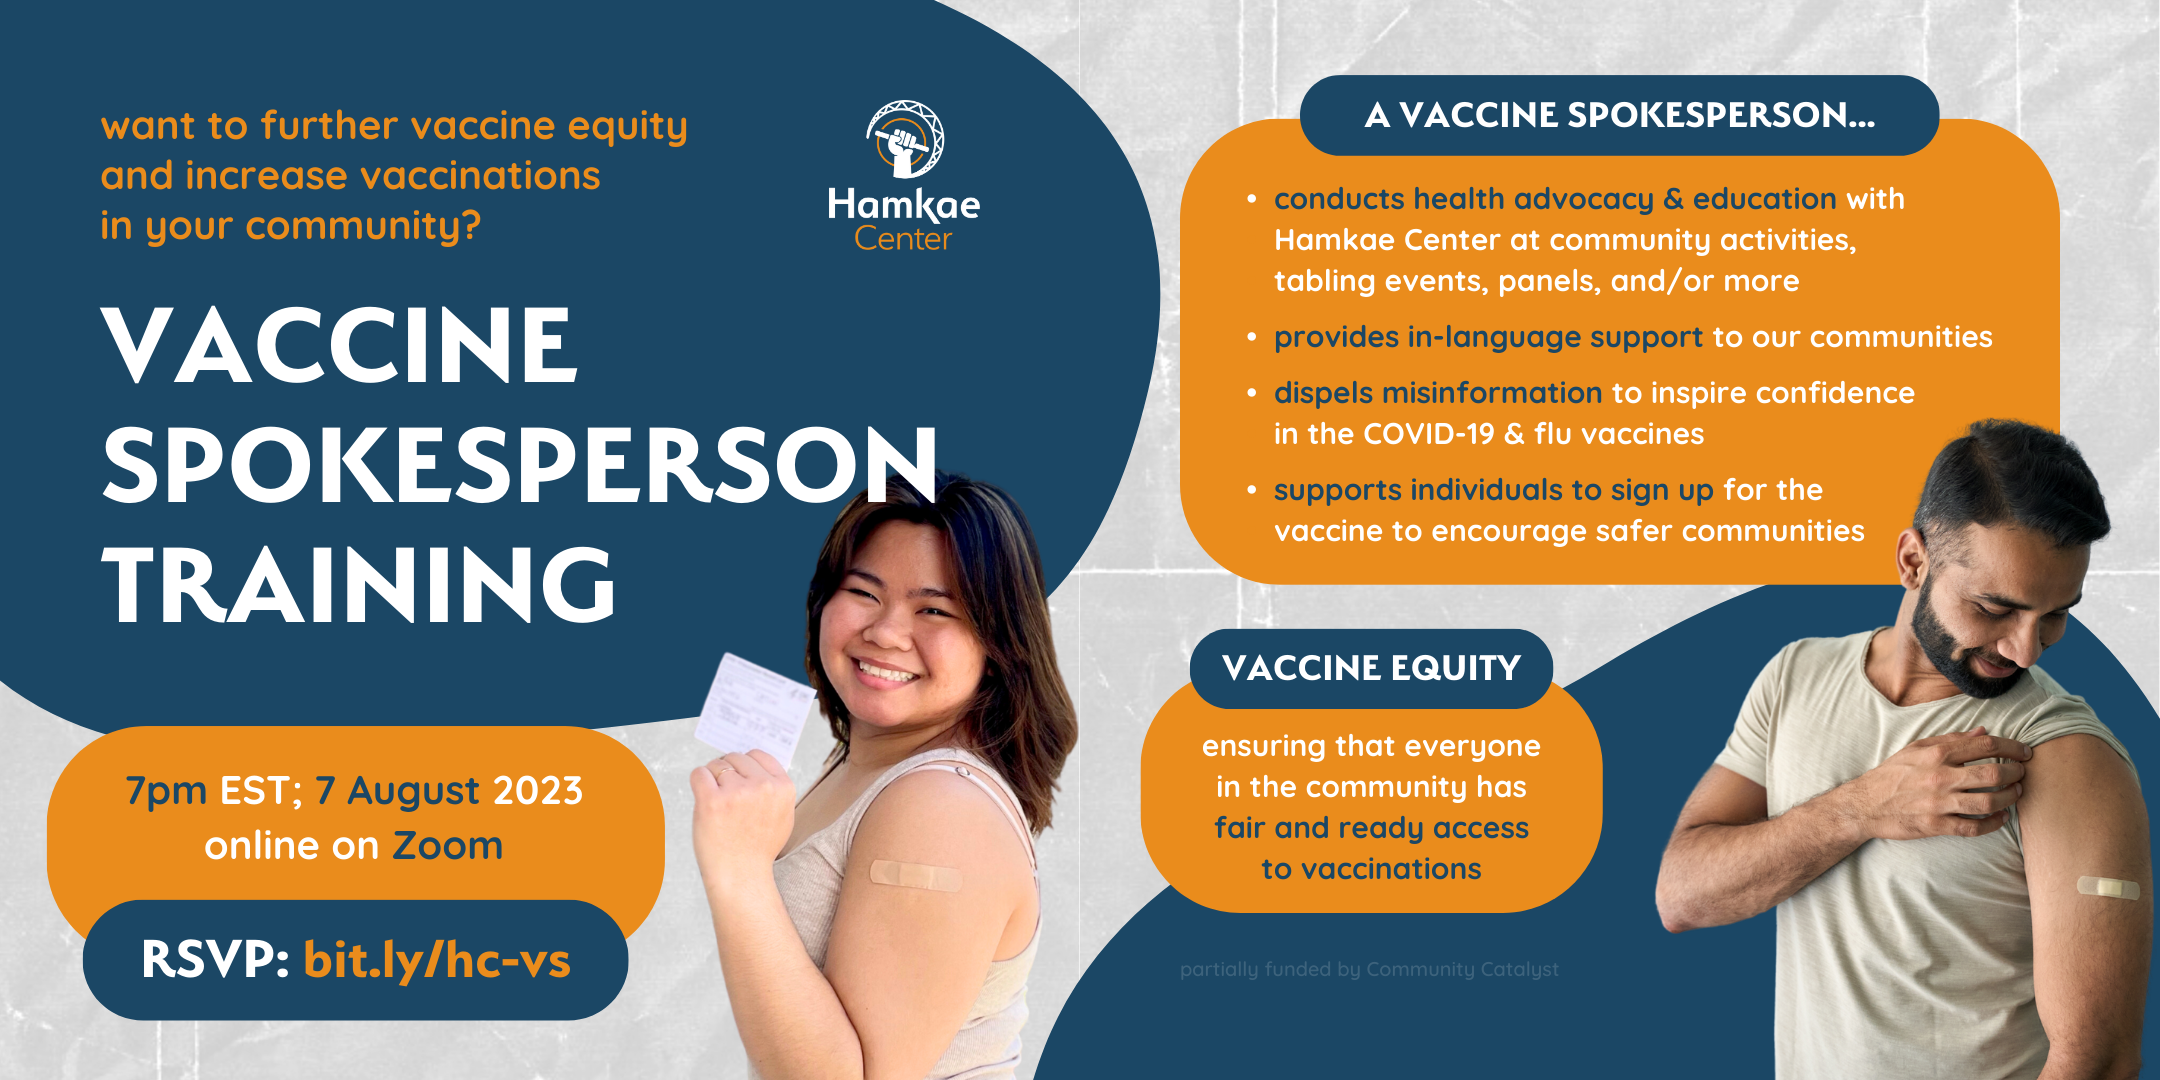 Want to further vaccine equity and increase vaccinations in your community? Hamkae Center's Vaccine Spokesperson Training 7pm EST on 7 August 2023; online on Zoom. RSVP: bit.ly/hc-vs Cutout of a young Vietnamese woman person smiling and holding up her COVID-19 vaccine card. She has a bandage plastered on her upper left arm. A vaccine spokesperson... - Conducts health advocacy & education with Hamkae Center at community activities, tabling events, panels, and/or more - Provides in-language support to our communities - Dispels misinformation to inspire confidence in the COVID-19 & flu vaccines - Supports individuals to sign up for the vaccine to encourage safer communities Vaccine Equity: Ensuring that everyone in the community has fair and ready access to vaccinations Partially funded by Community Catalyst. Cutout of an Indian man smiling and holding up his t-shirt sleeve to look at the bandage plastered on his upper left arm.